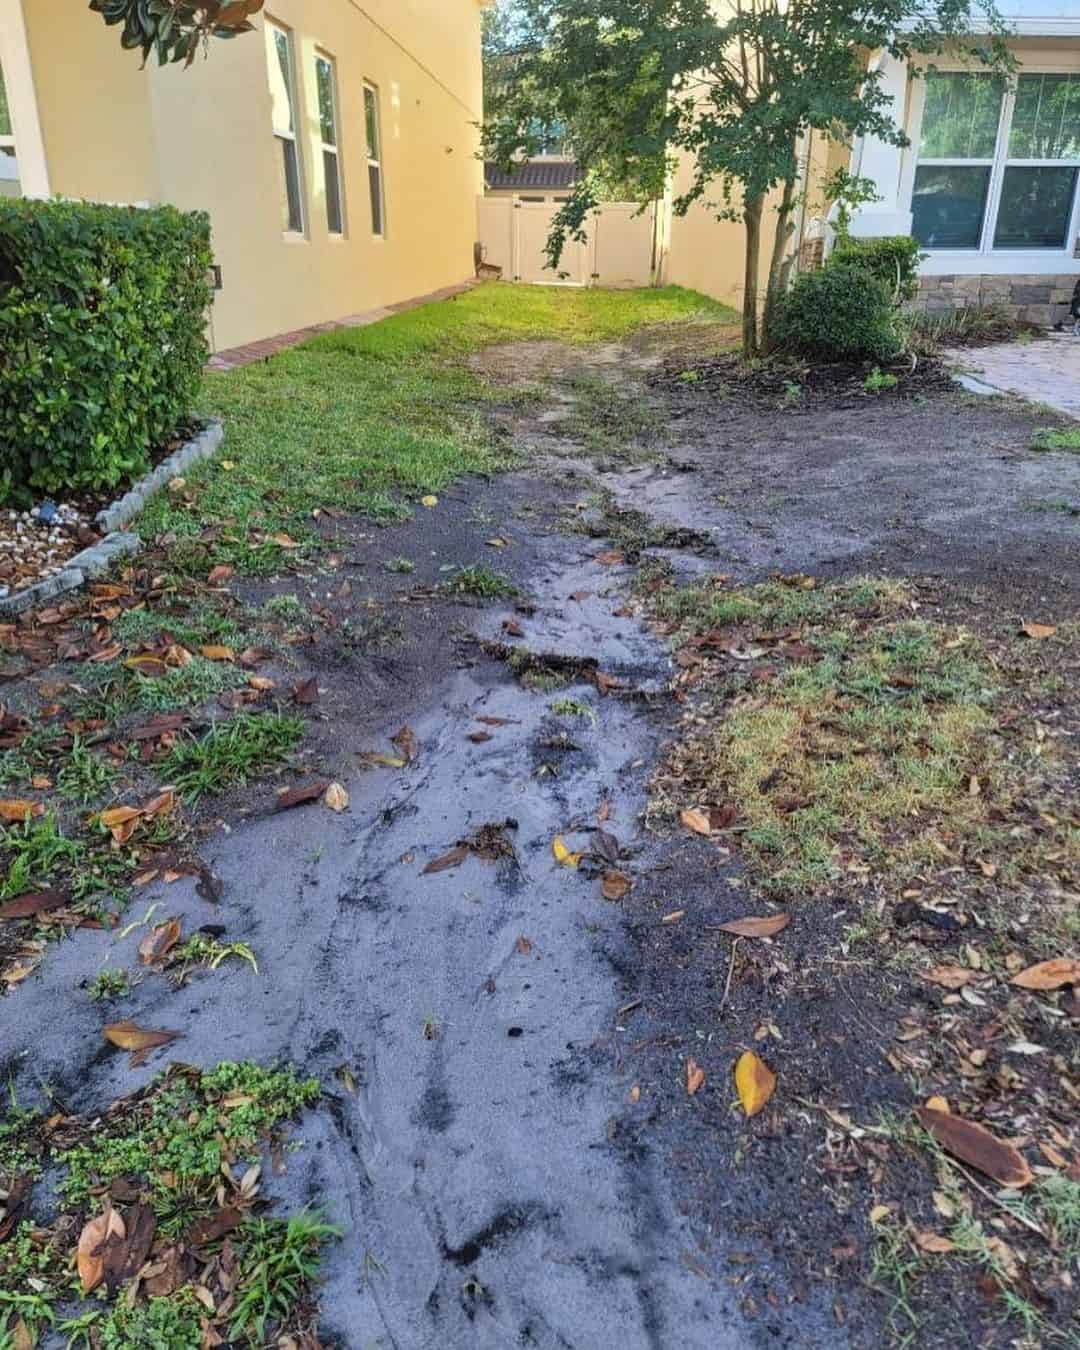 How To Prevent Water Runoff Damage?